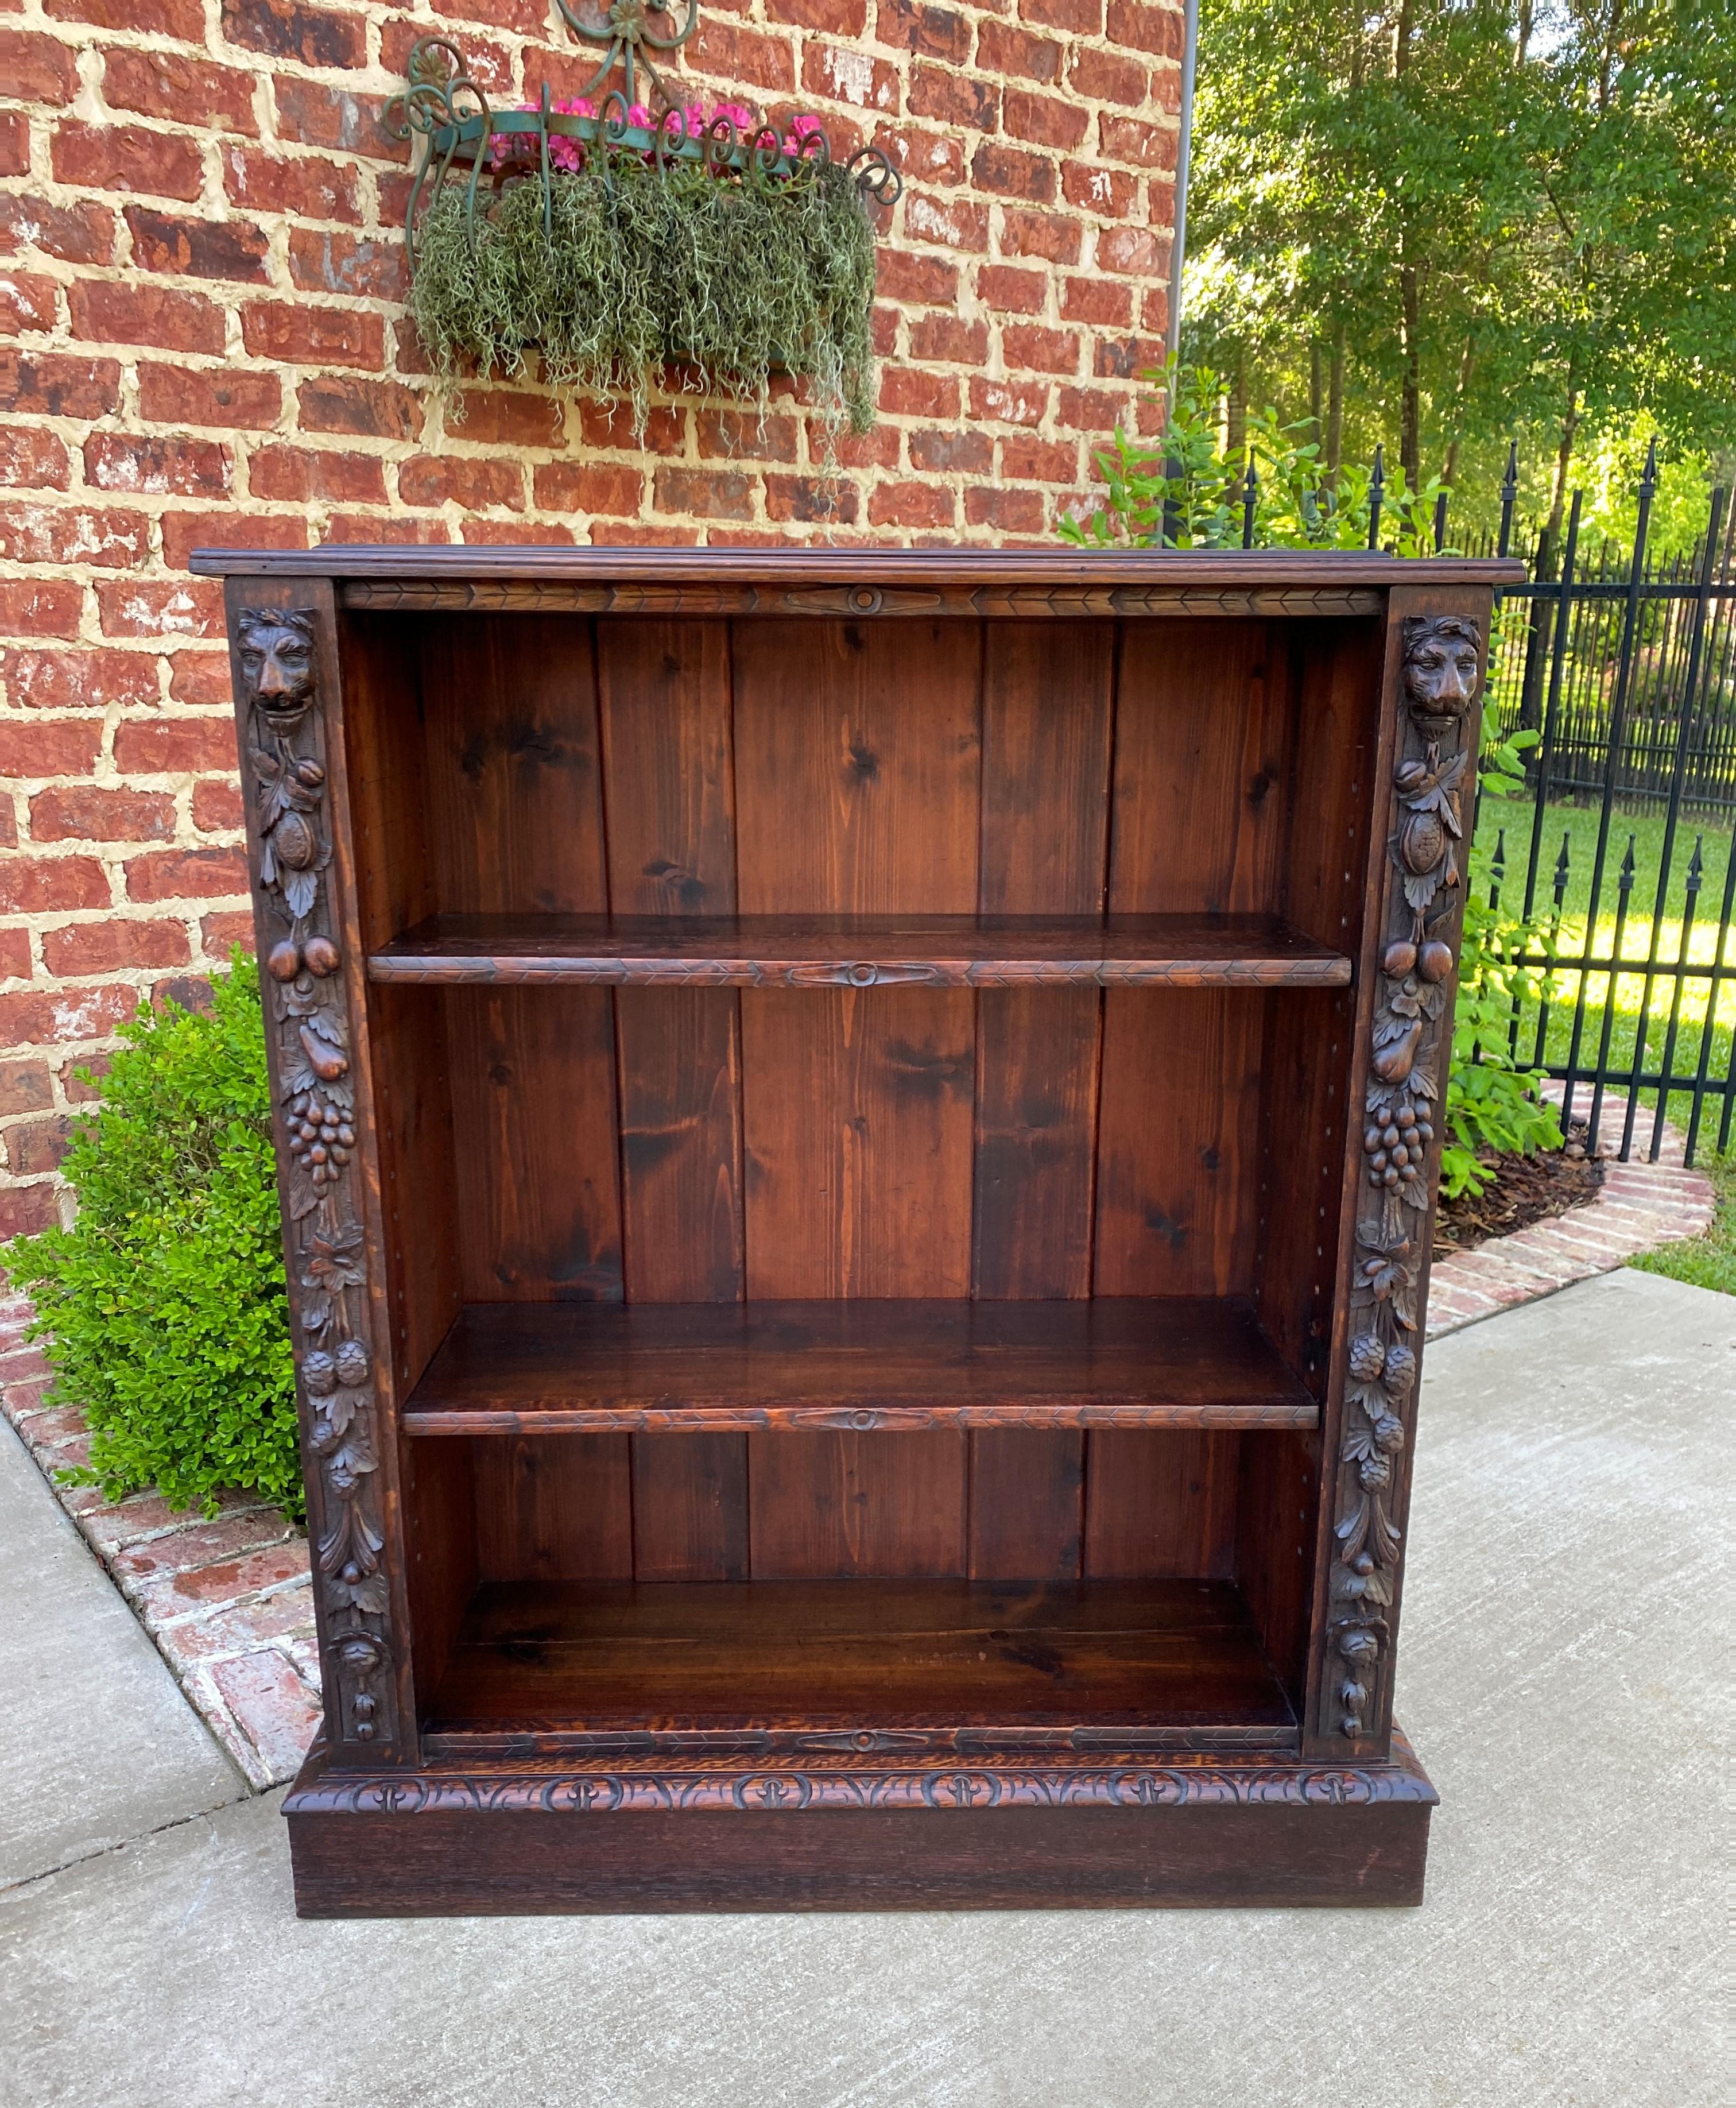 BEAUTIFUL Antique English Oak Freestanding Display Shelf, Cabinet or Bookcase ~~c. 1920s

PERFECT for displaying your favorite antique collectibles or use as a bookcase~~top surface above shelves is flat for additional display~~carved lion masks,